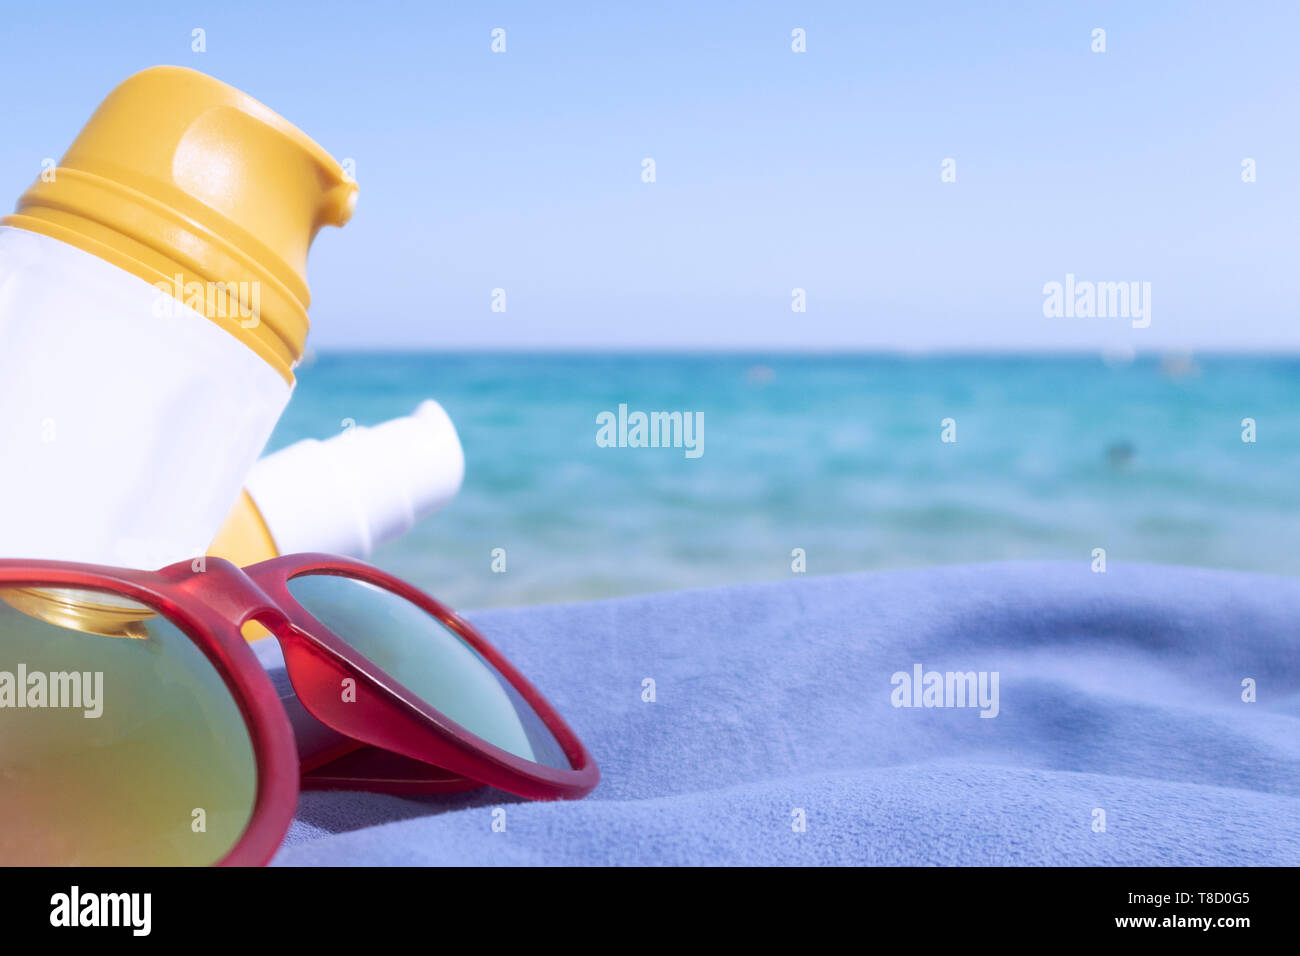 sun creams for summer. sun protection against sunburn. hydration and personal care on the beach. cream bottles for the skin. go to the beach Stock Photo